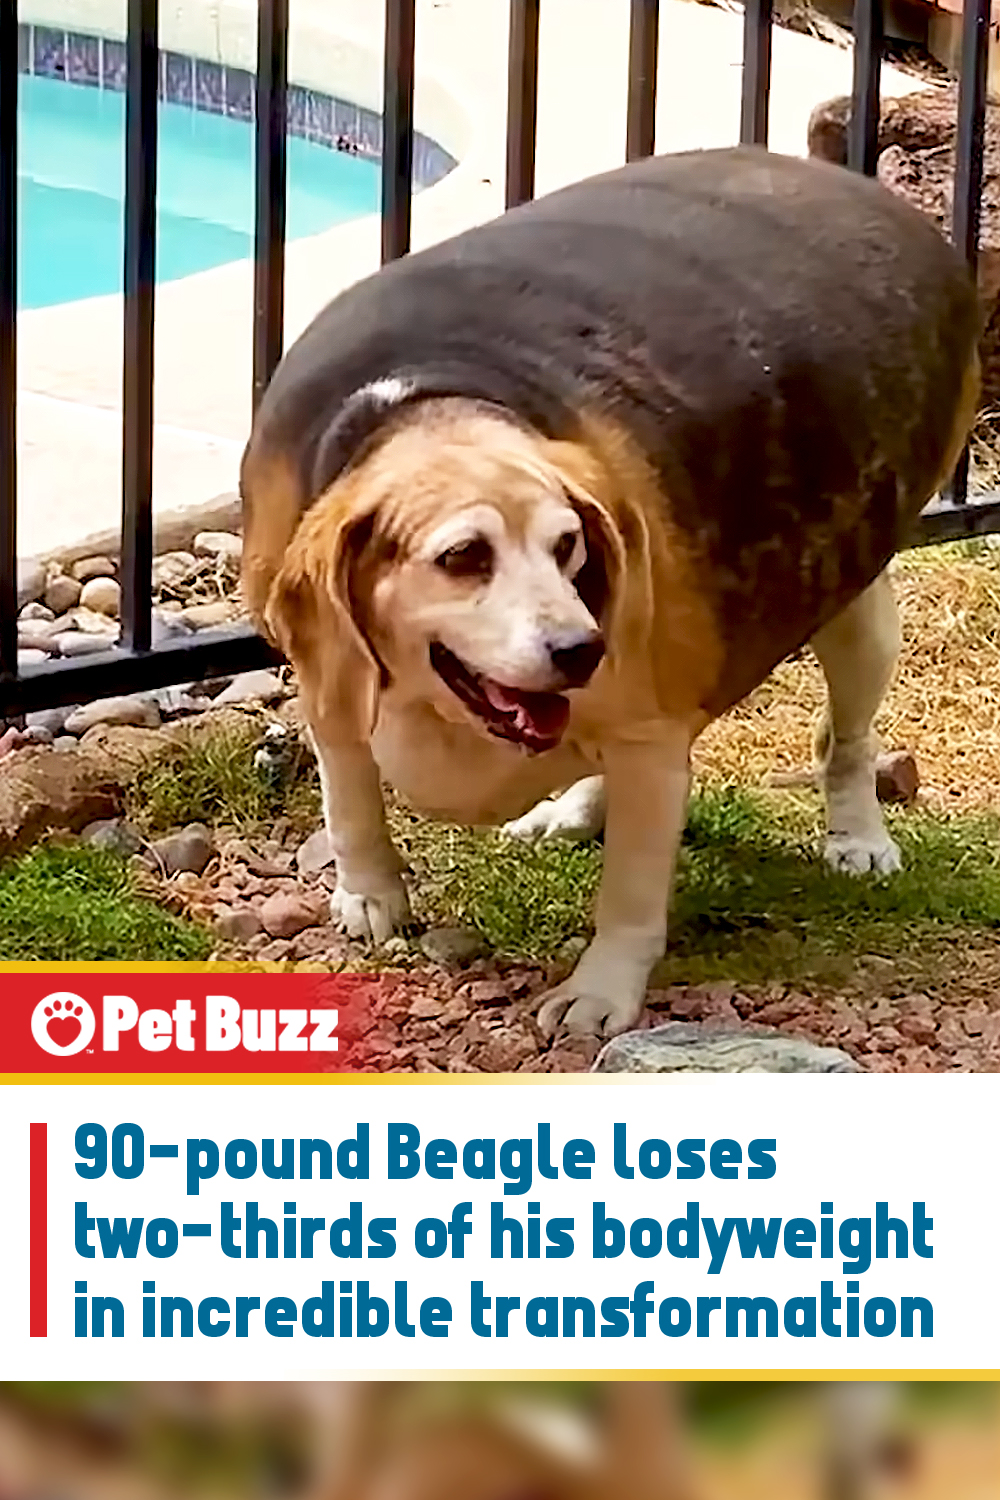 90-pound Beagle loses two-thirds of his bodyweight in incredible transformation